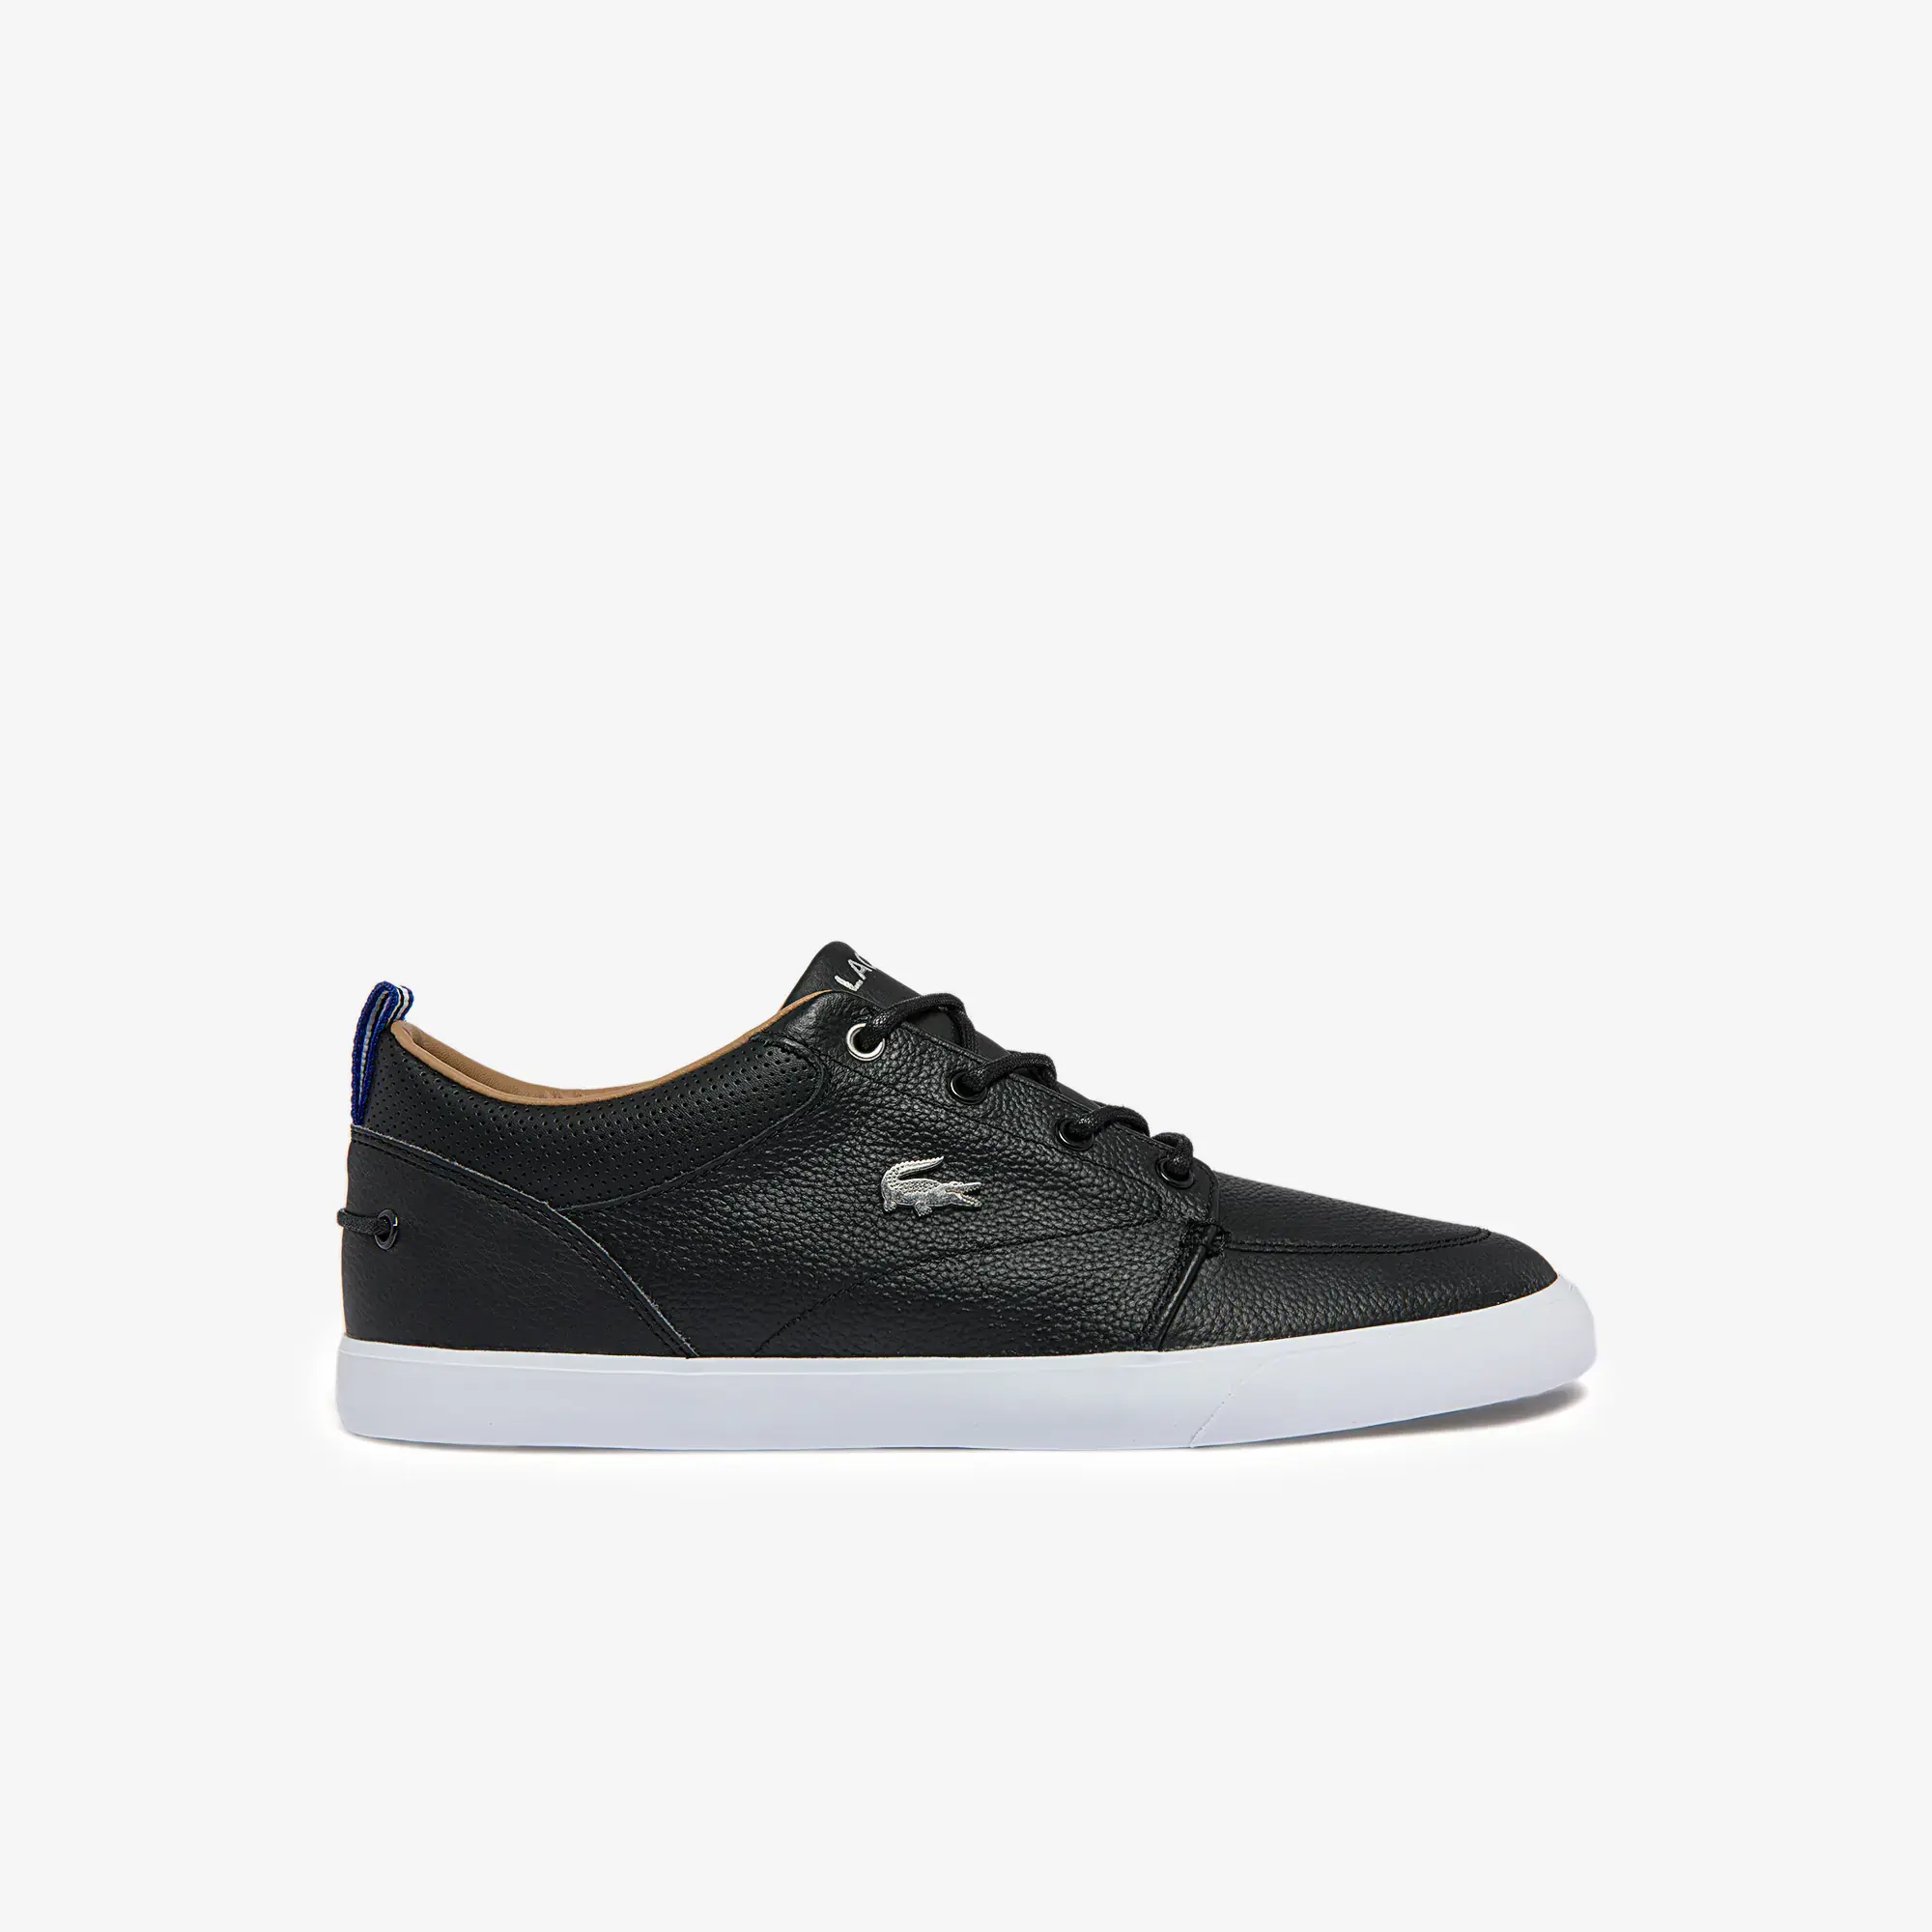 Lacoste Men's Bayliss Leather Perforated Collar Sneakers. 1